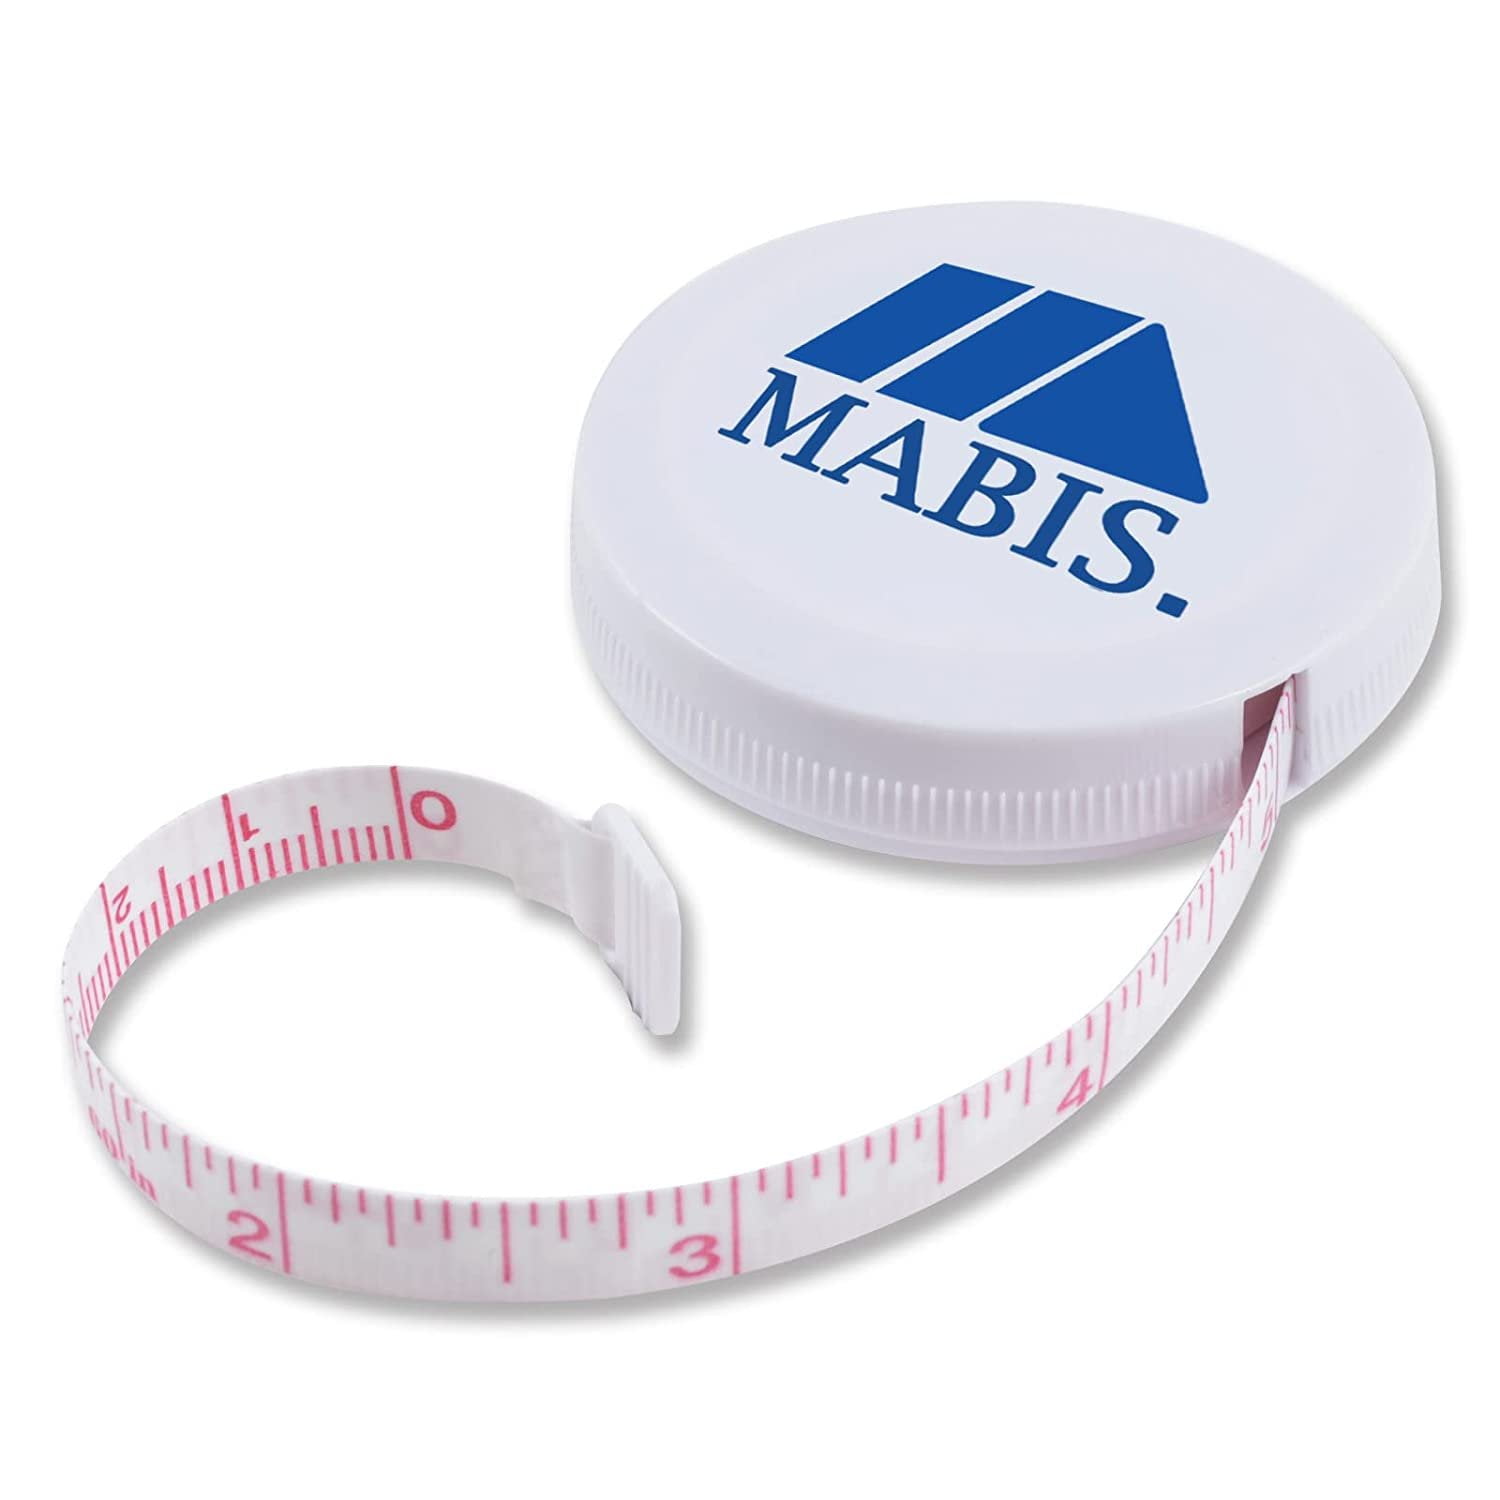 MABIS Tape Measure Measuring Tape for Body, Pocket Size Compact Retractable  Flexible, 60 inches, White 